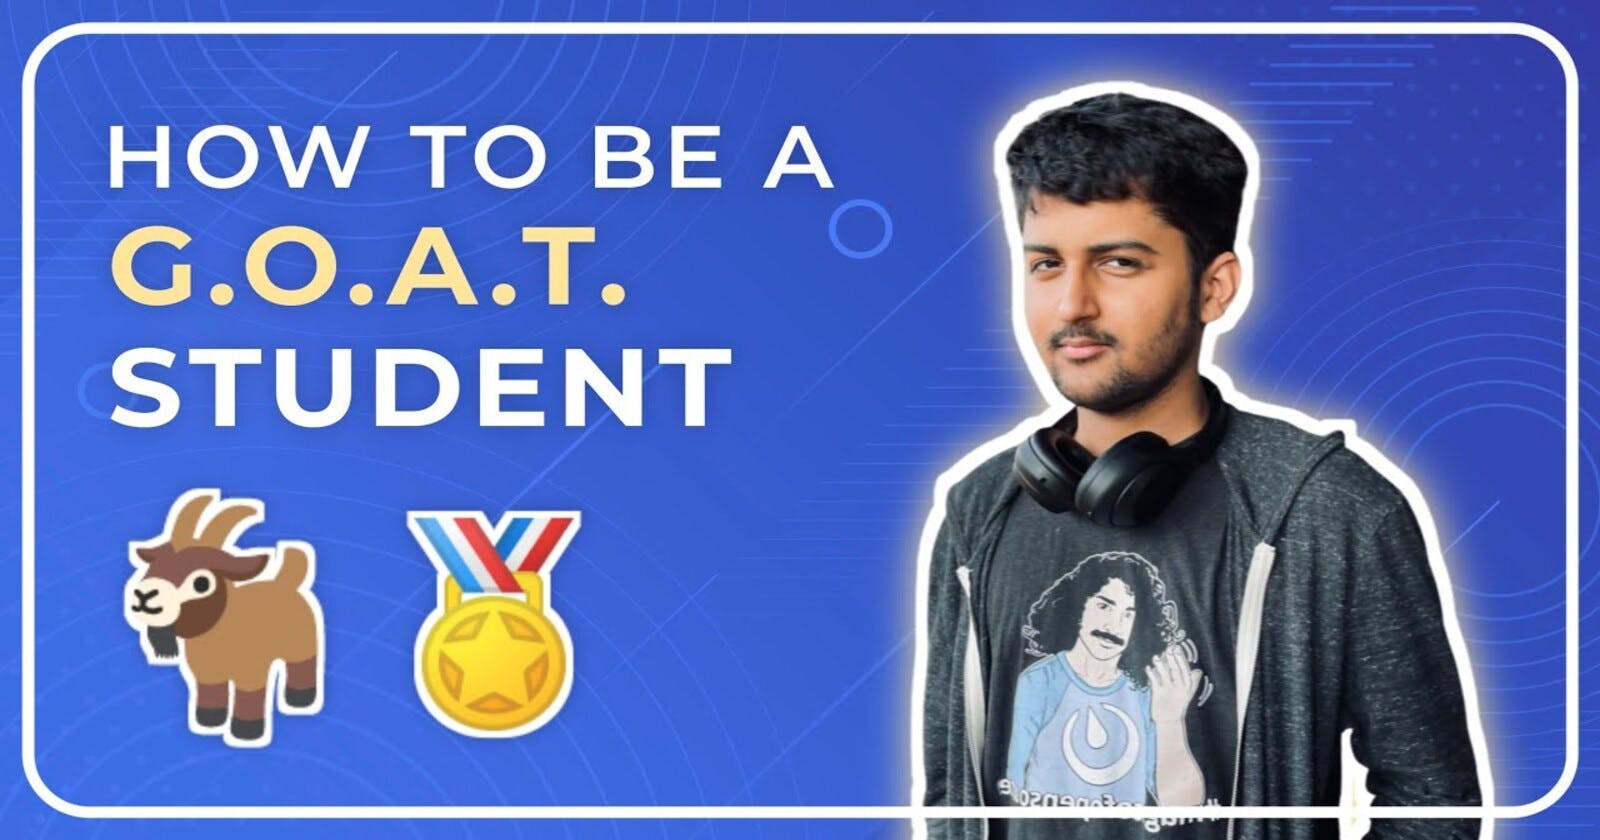 How to Be a GOAT Student? My Top 4 Career Tips 🏆 - Kunal Kushwaha